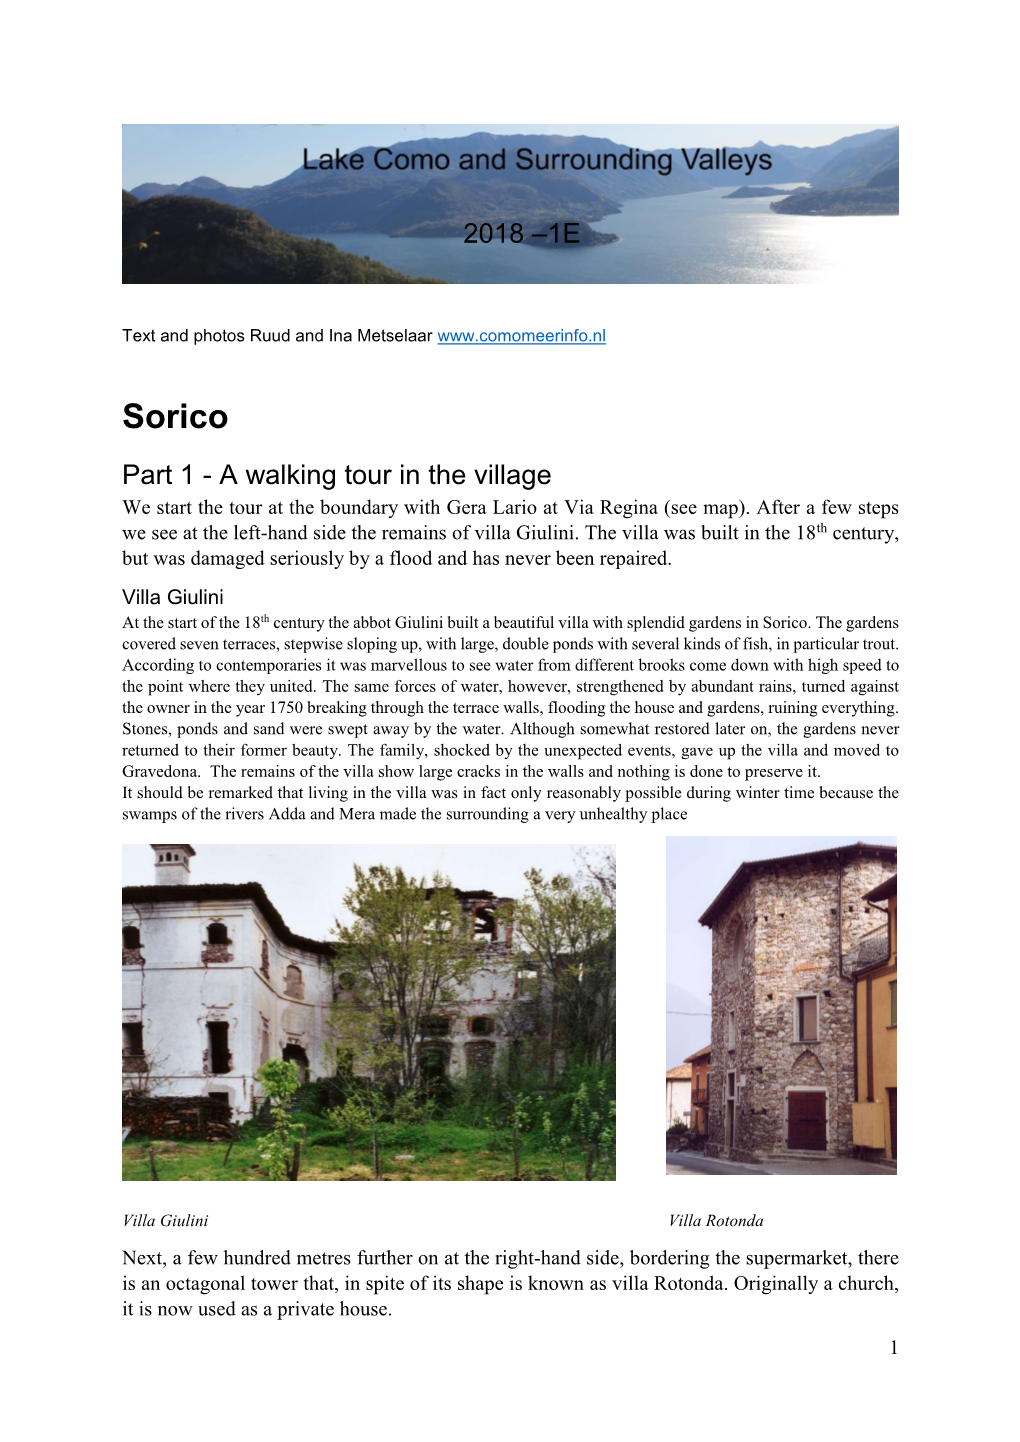 Sorico Part 1 - a Walking Tour in the Village We Start the Tour at the Boundary with Gera Lario at Via Regina (See Map)